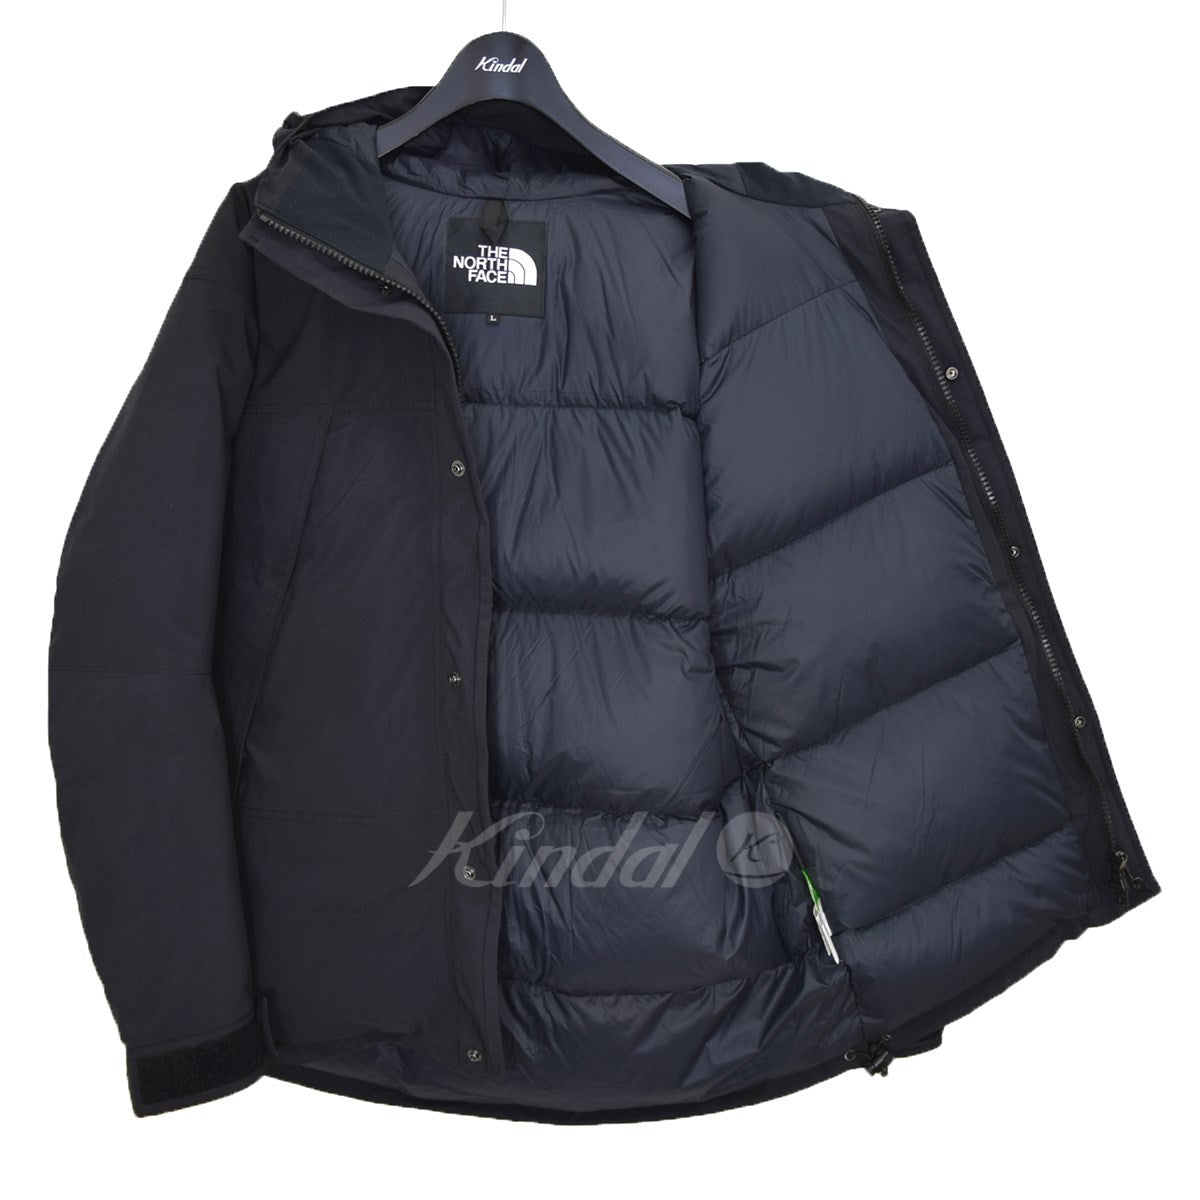 THE NORTH FACE(ザノースフェイス) MOUNTAIN DOWN JACKET マウンテン ...